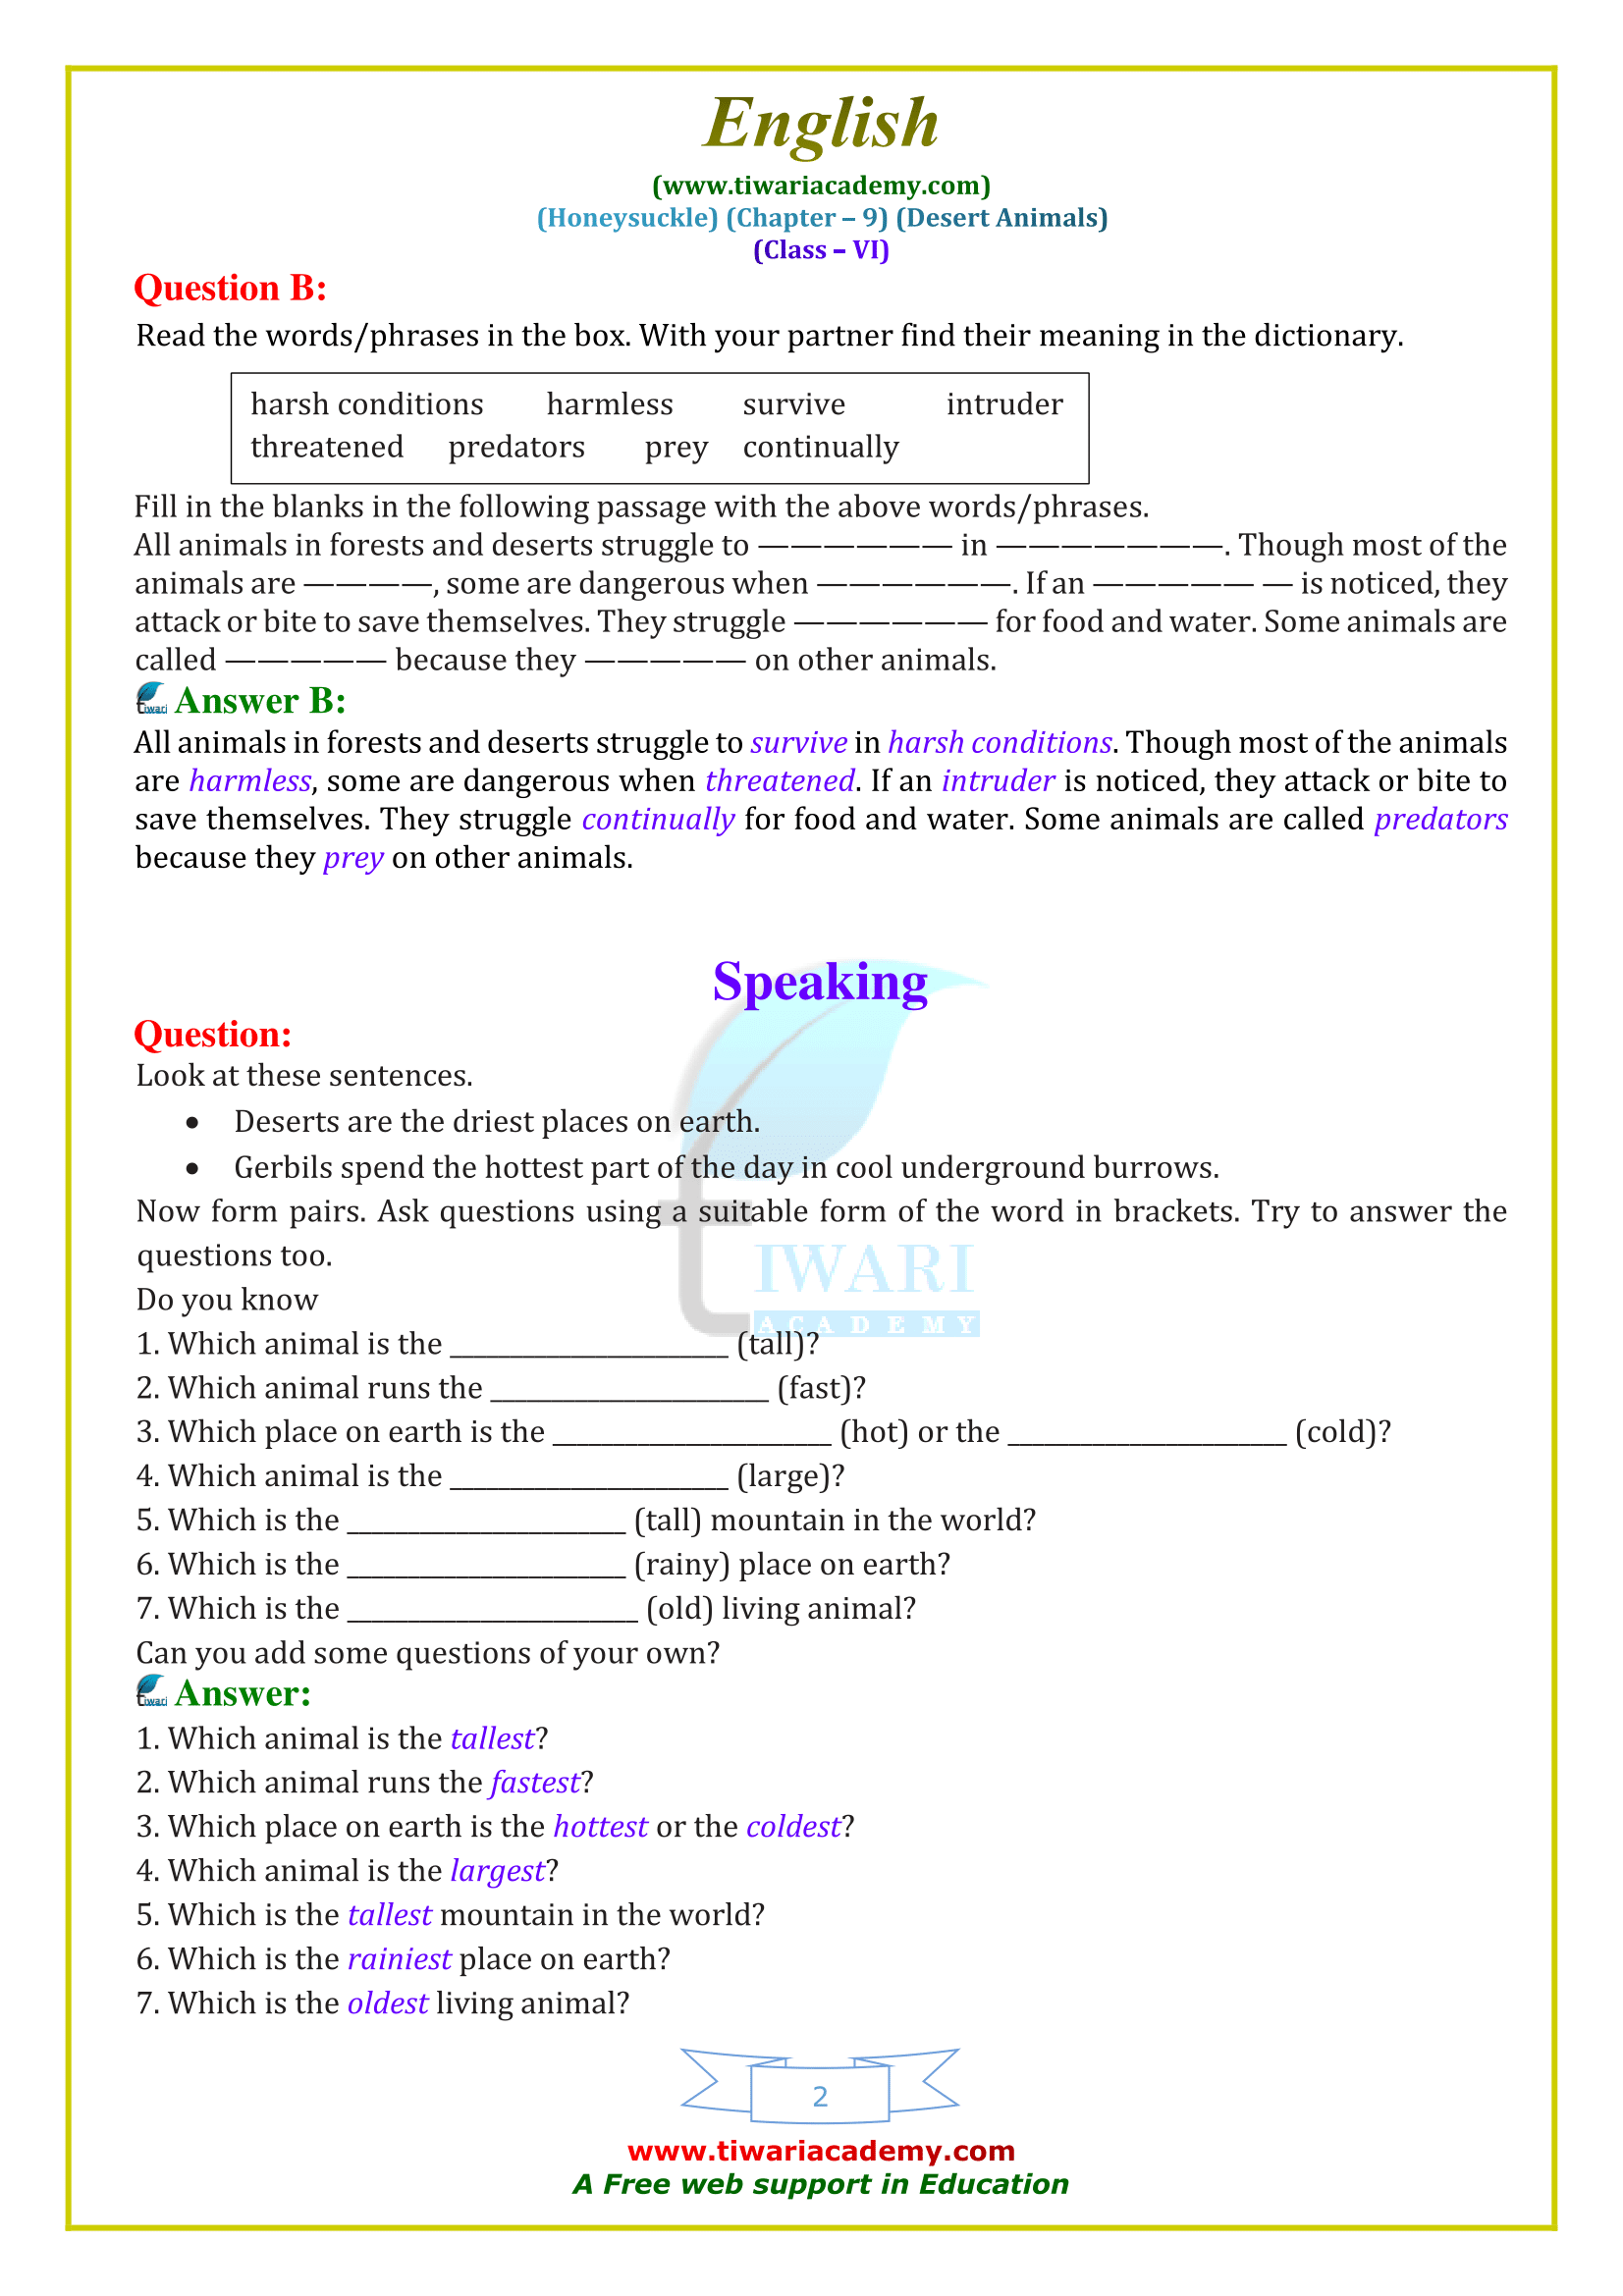 NCERT Solutions for Class 6 English Honeysuckle Chapter 9 in PDF